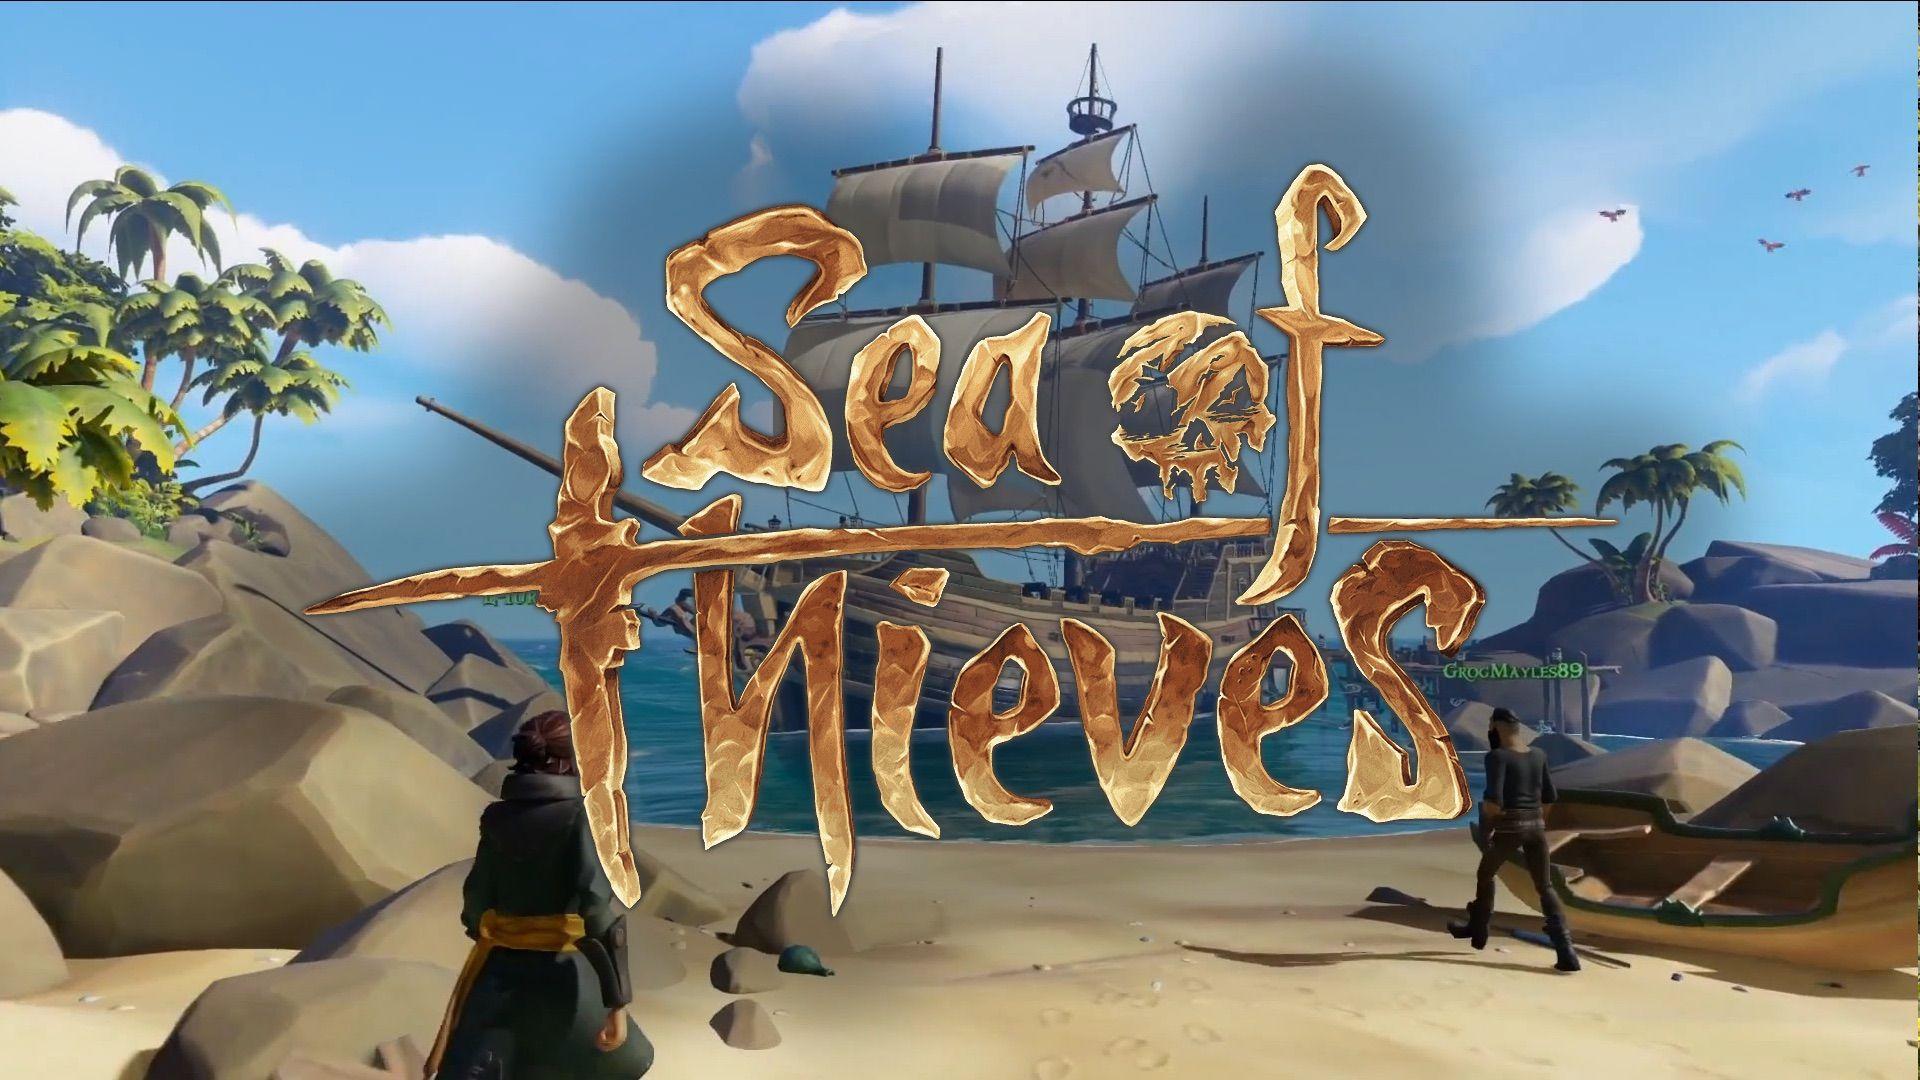 Sea of Thieves news at The Game Awards on December 7th